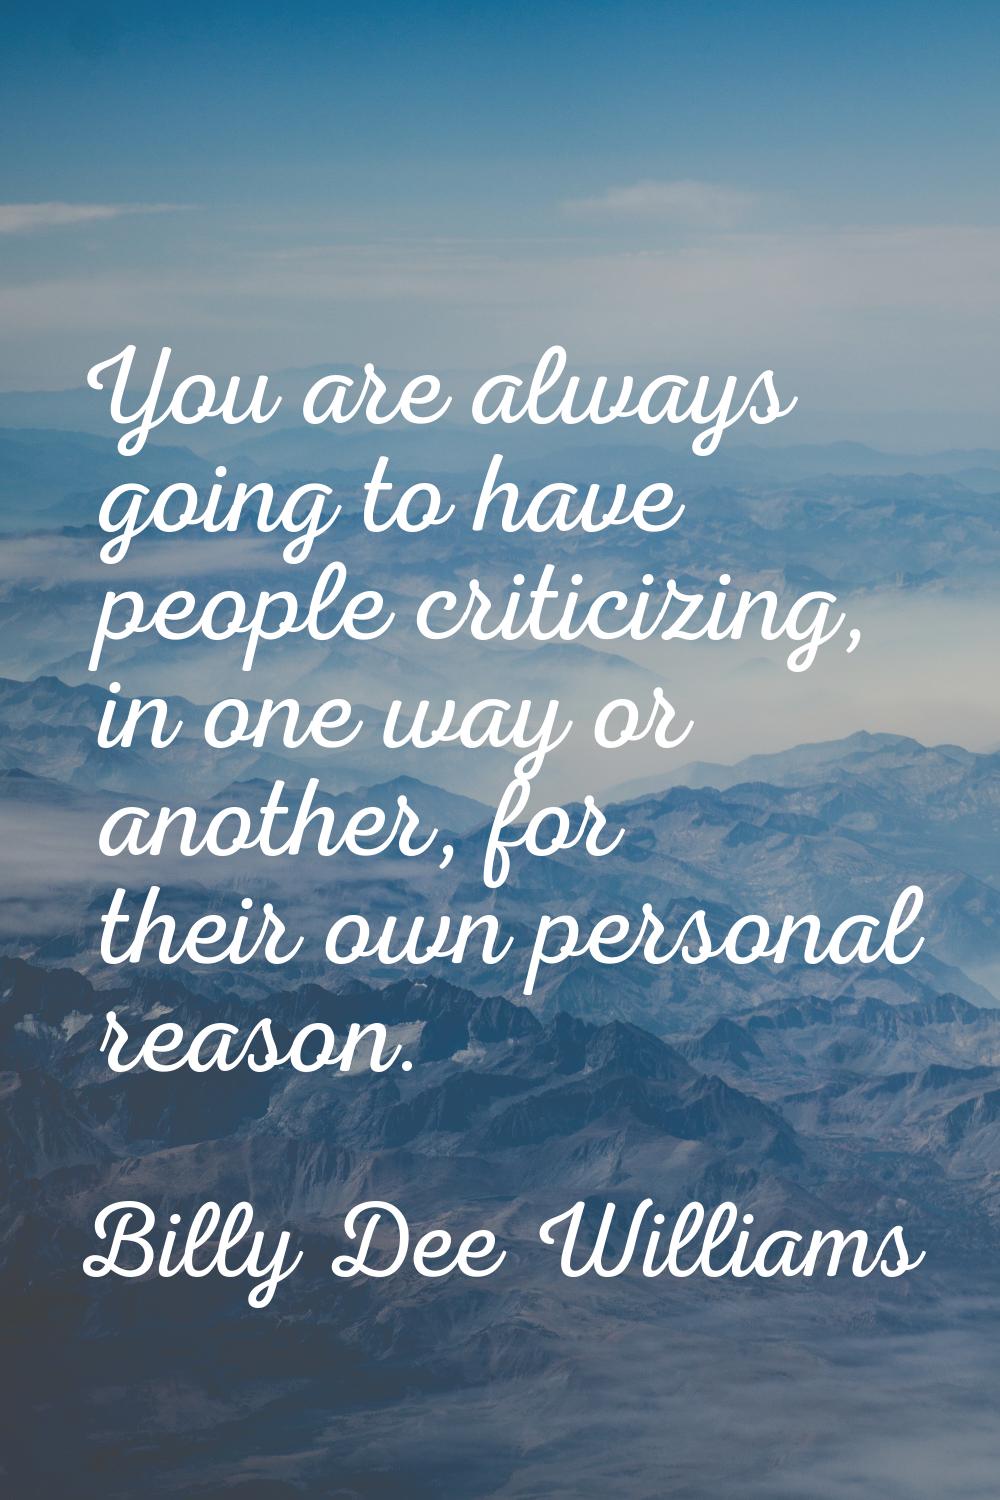 You are always going to have people criticizing, in one way or another, for their own personal reas